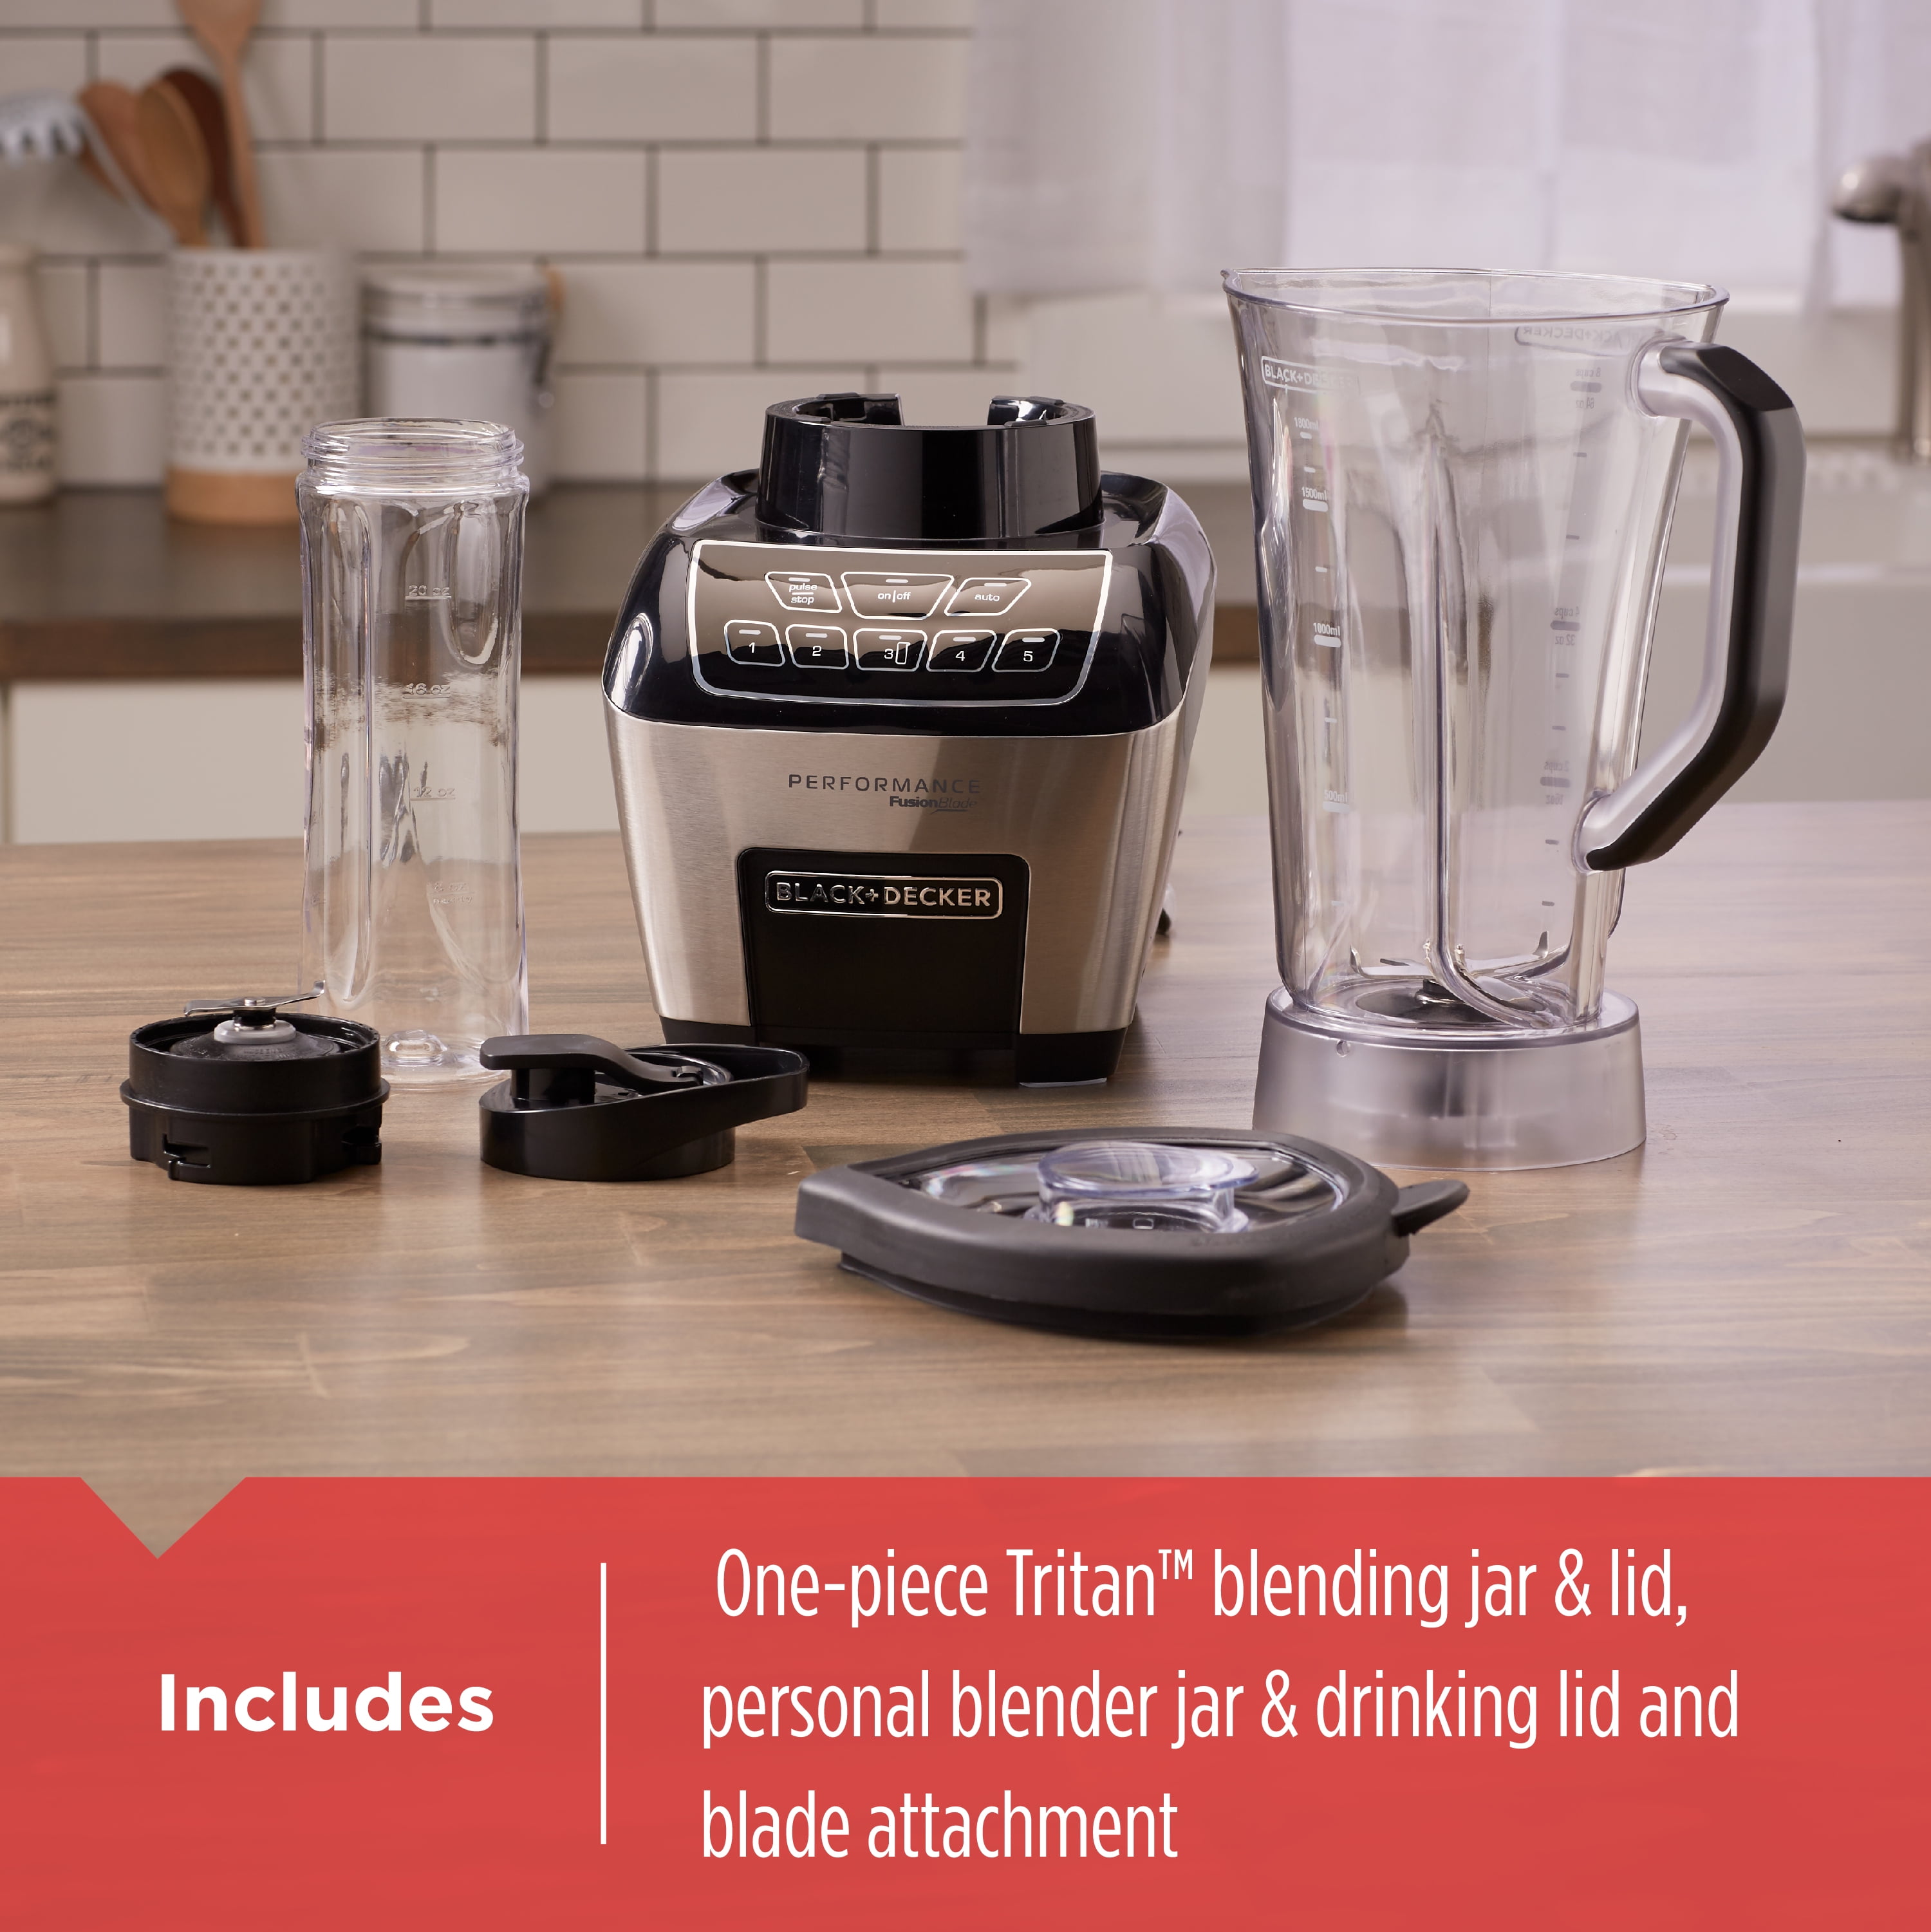 Black and Decker fusion blade blender for Sale in Portland, OR